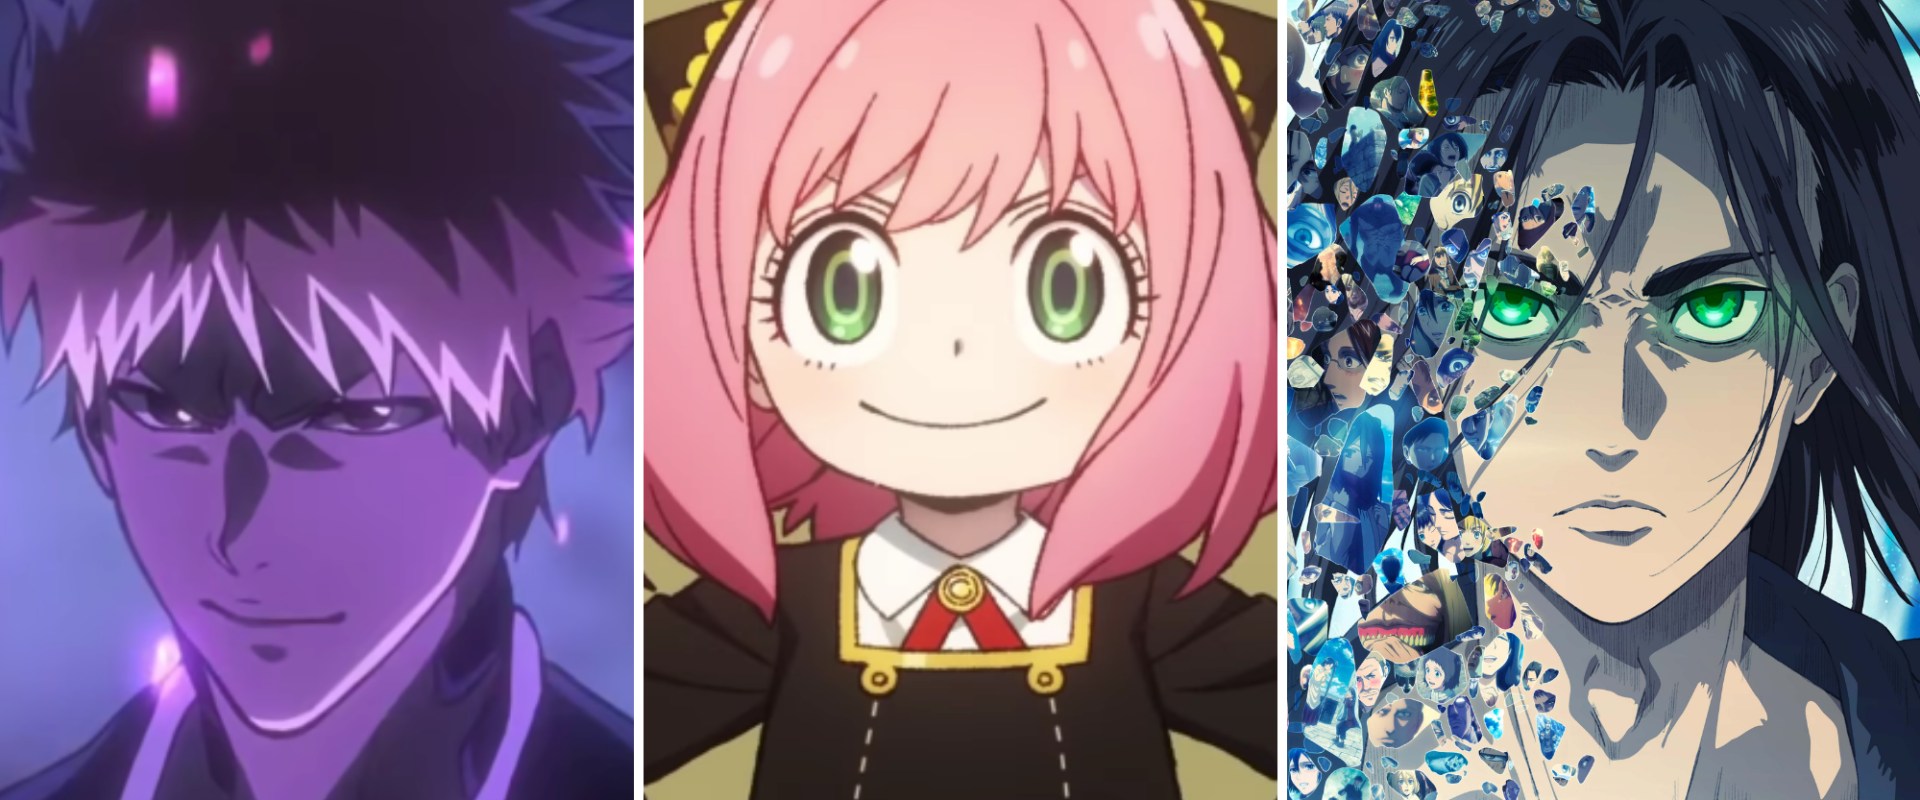 The Latest Anime Releases: What to Watch Now